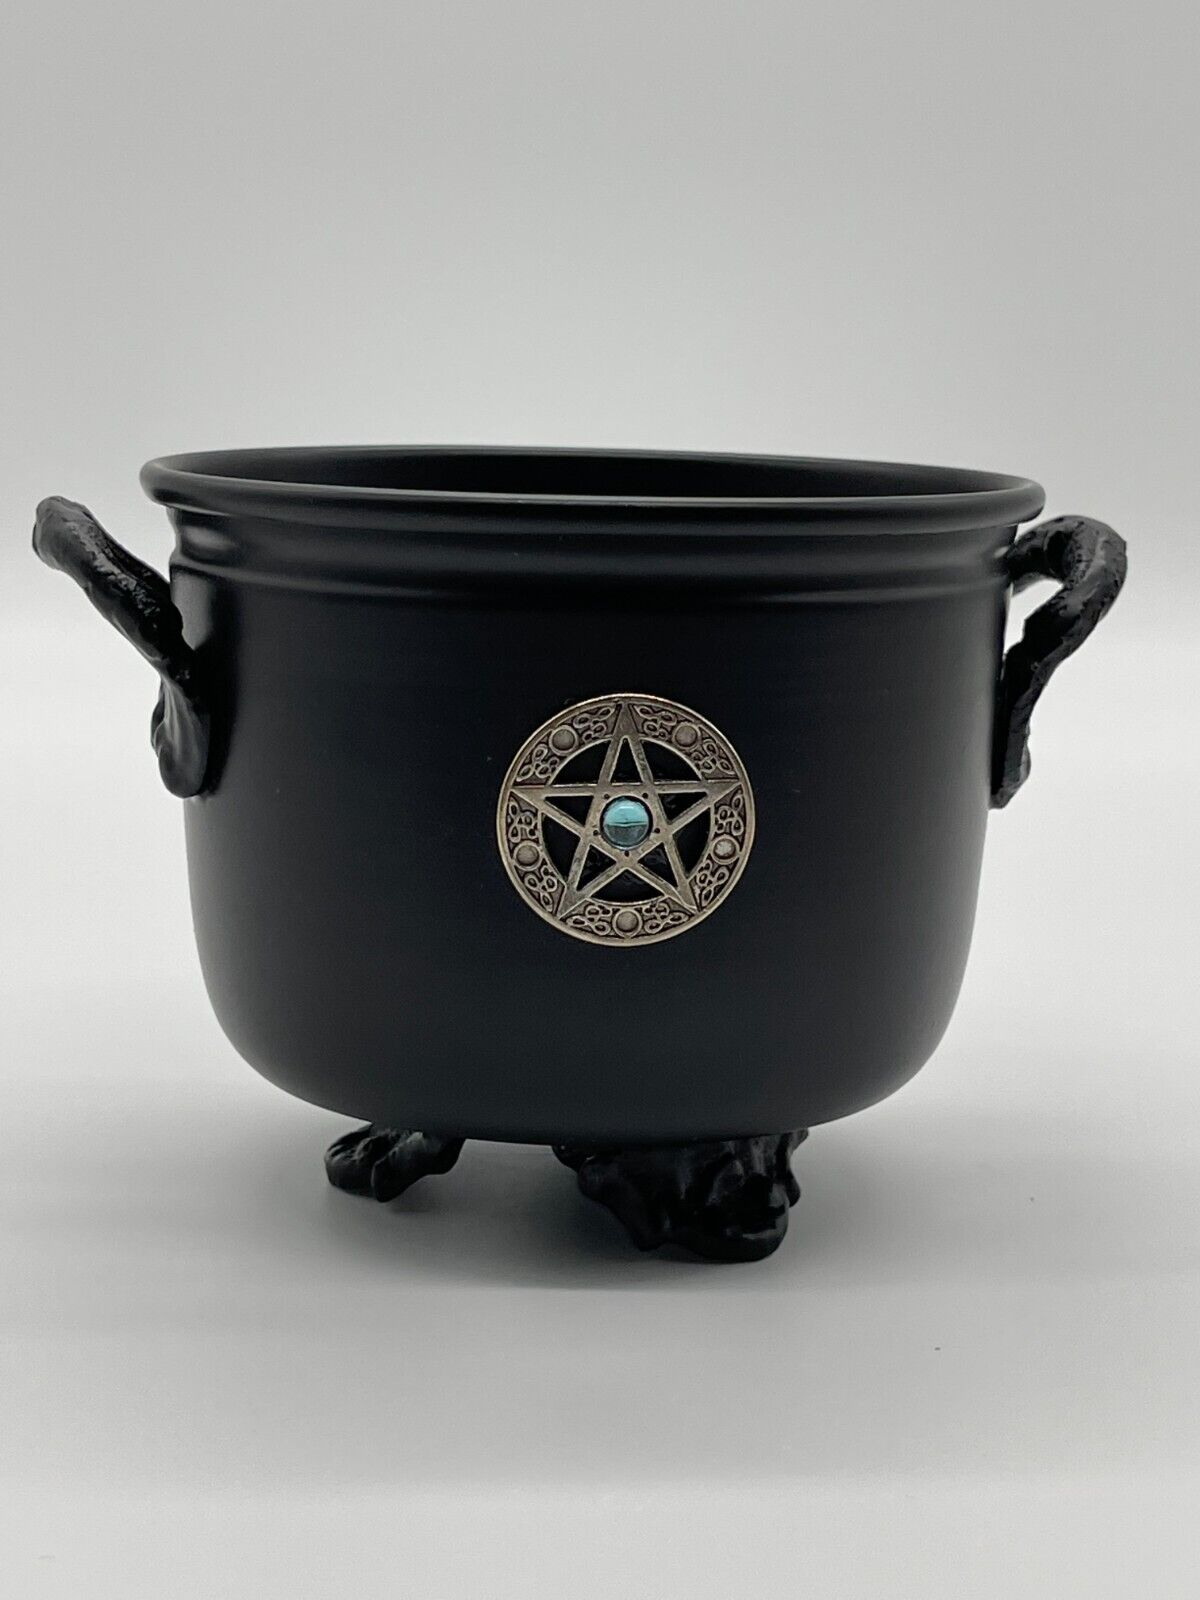 Metal Sheet Pentacle Cauldron, Witches cauldron, Great For Use With Resins